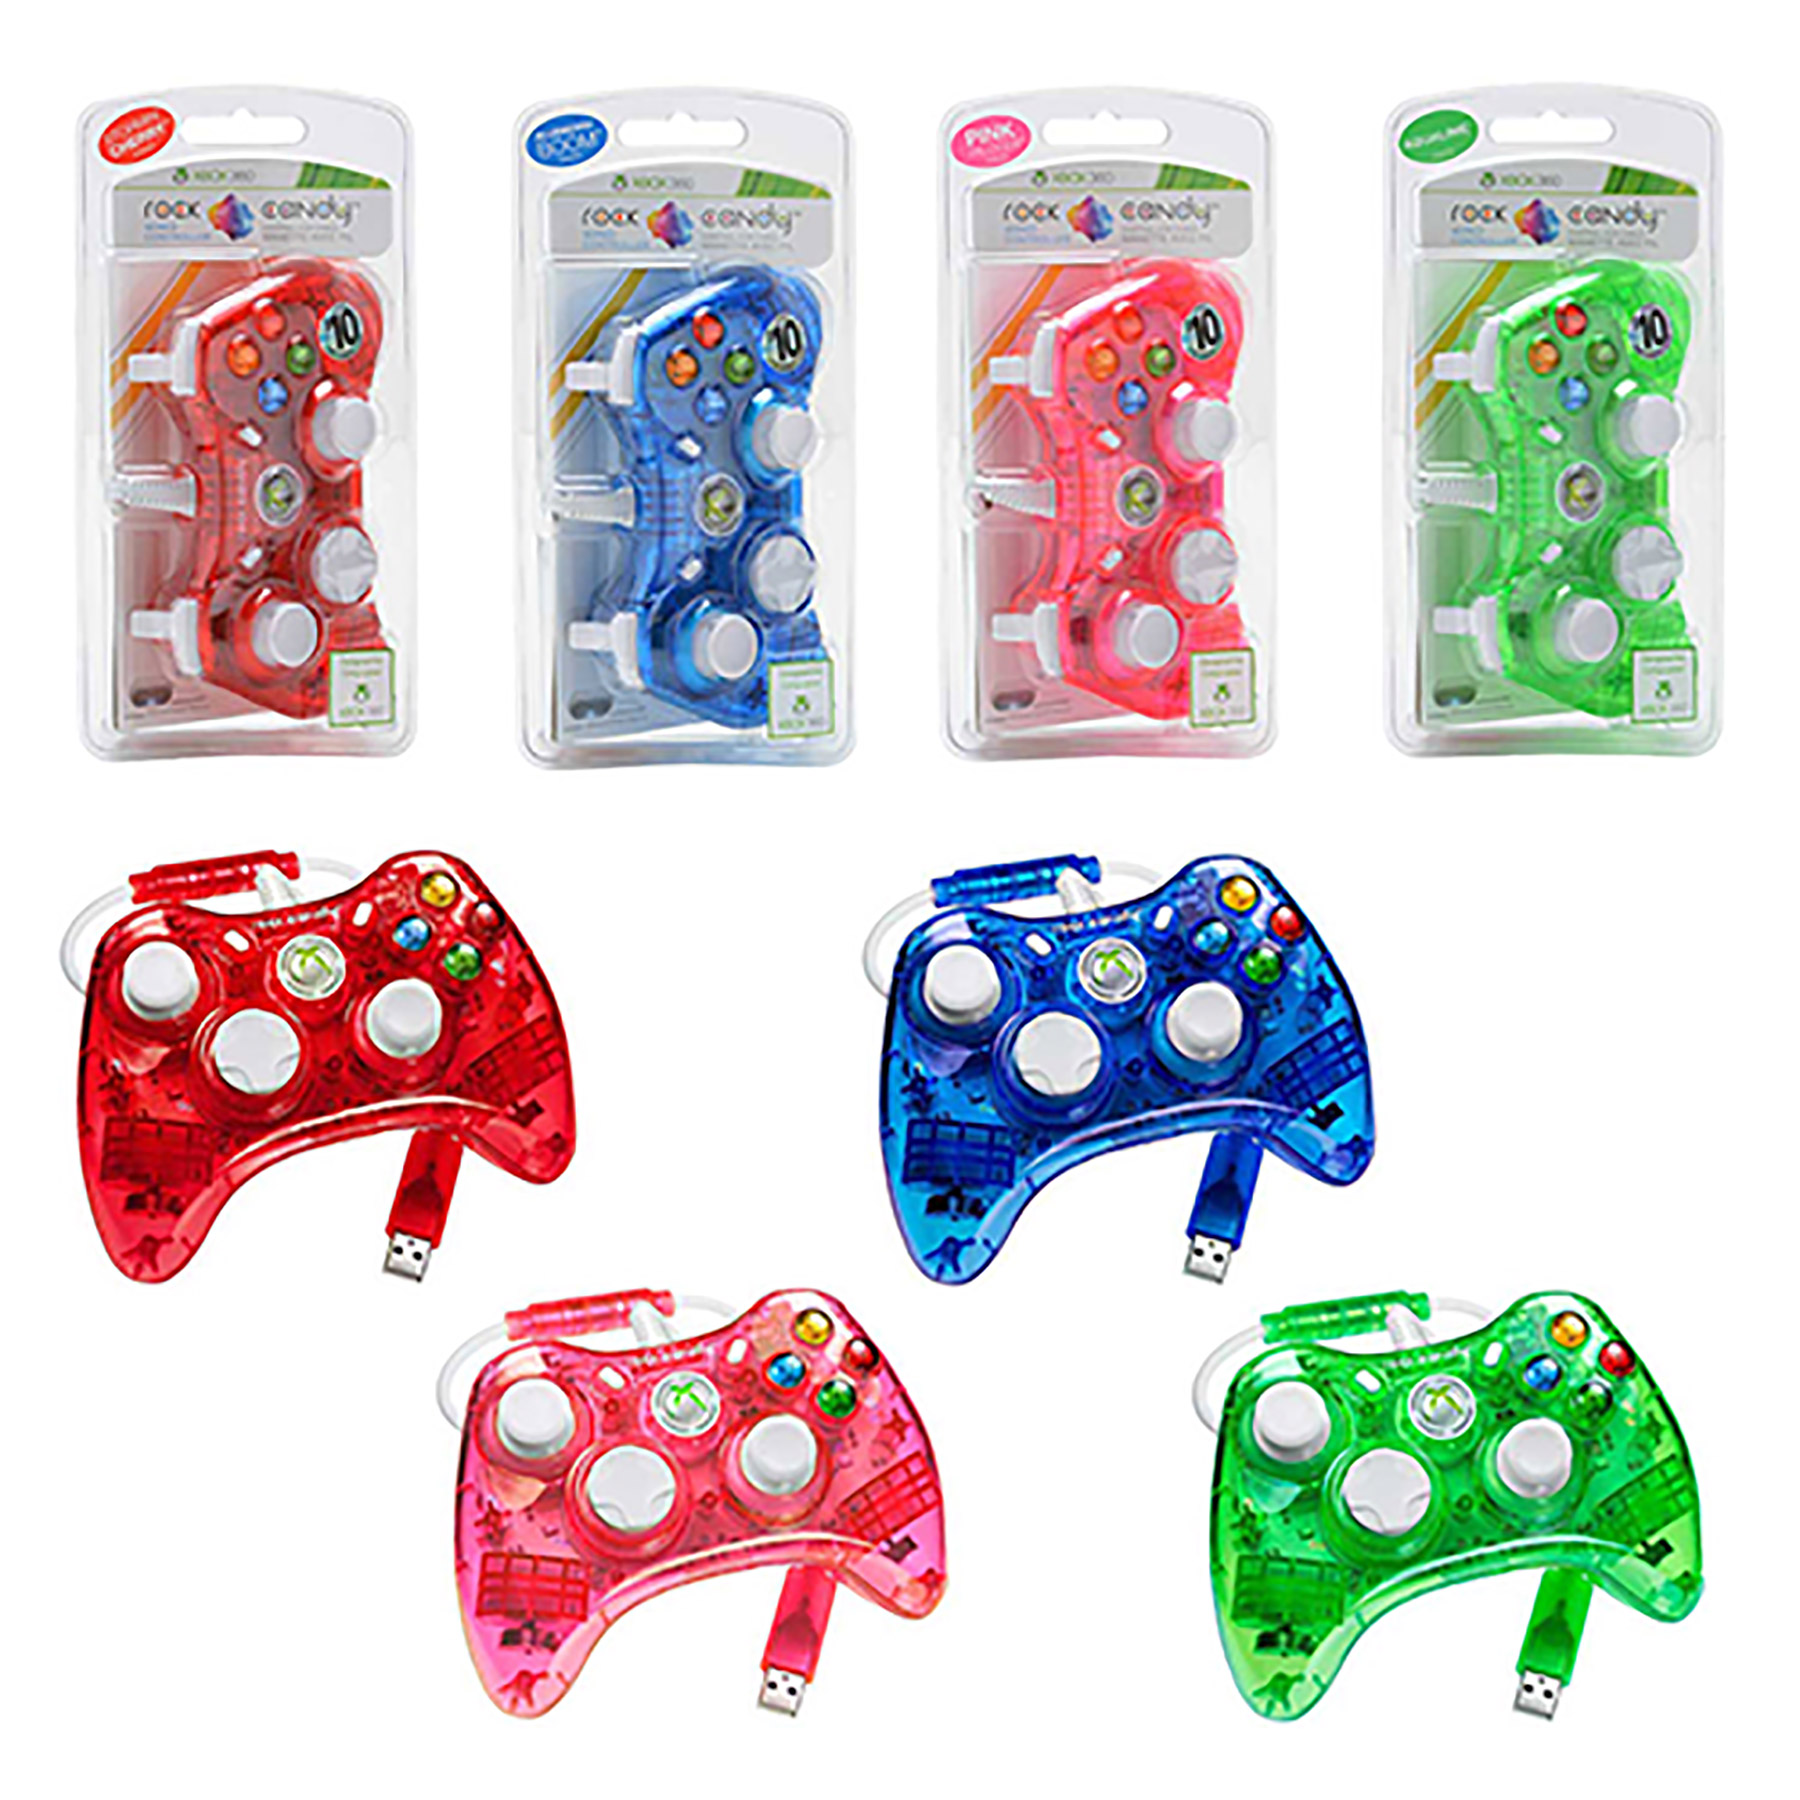 pdp rock candy wired controller for xbox 360